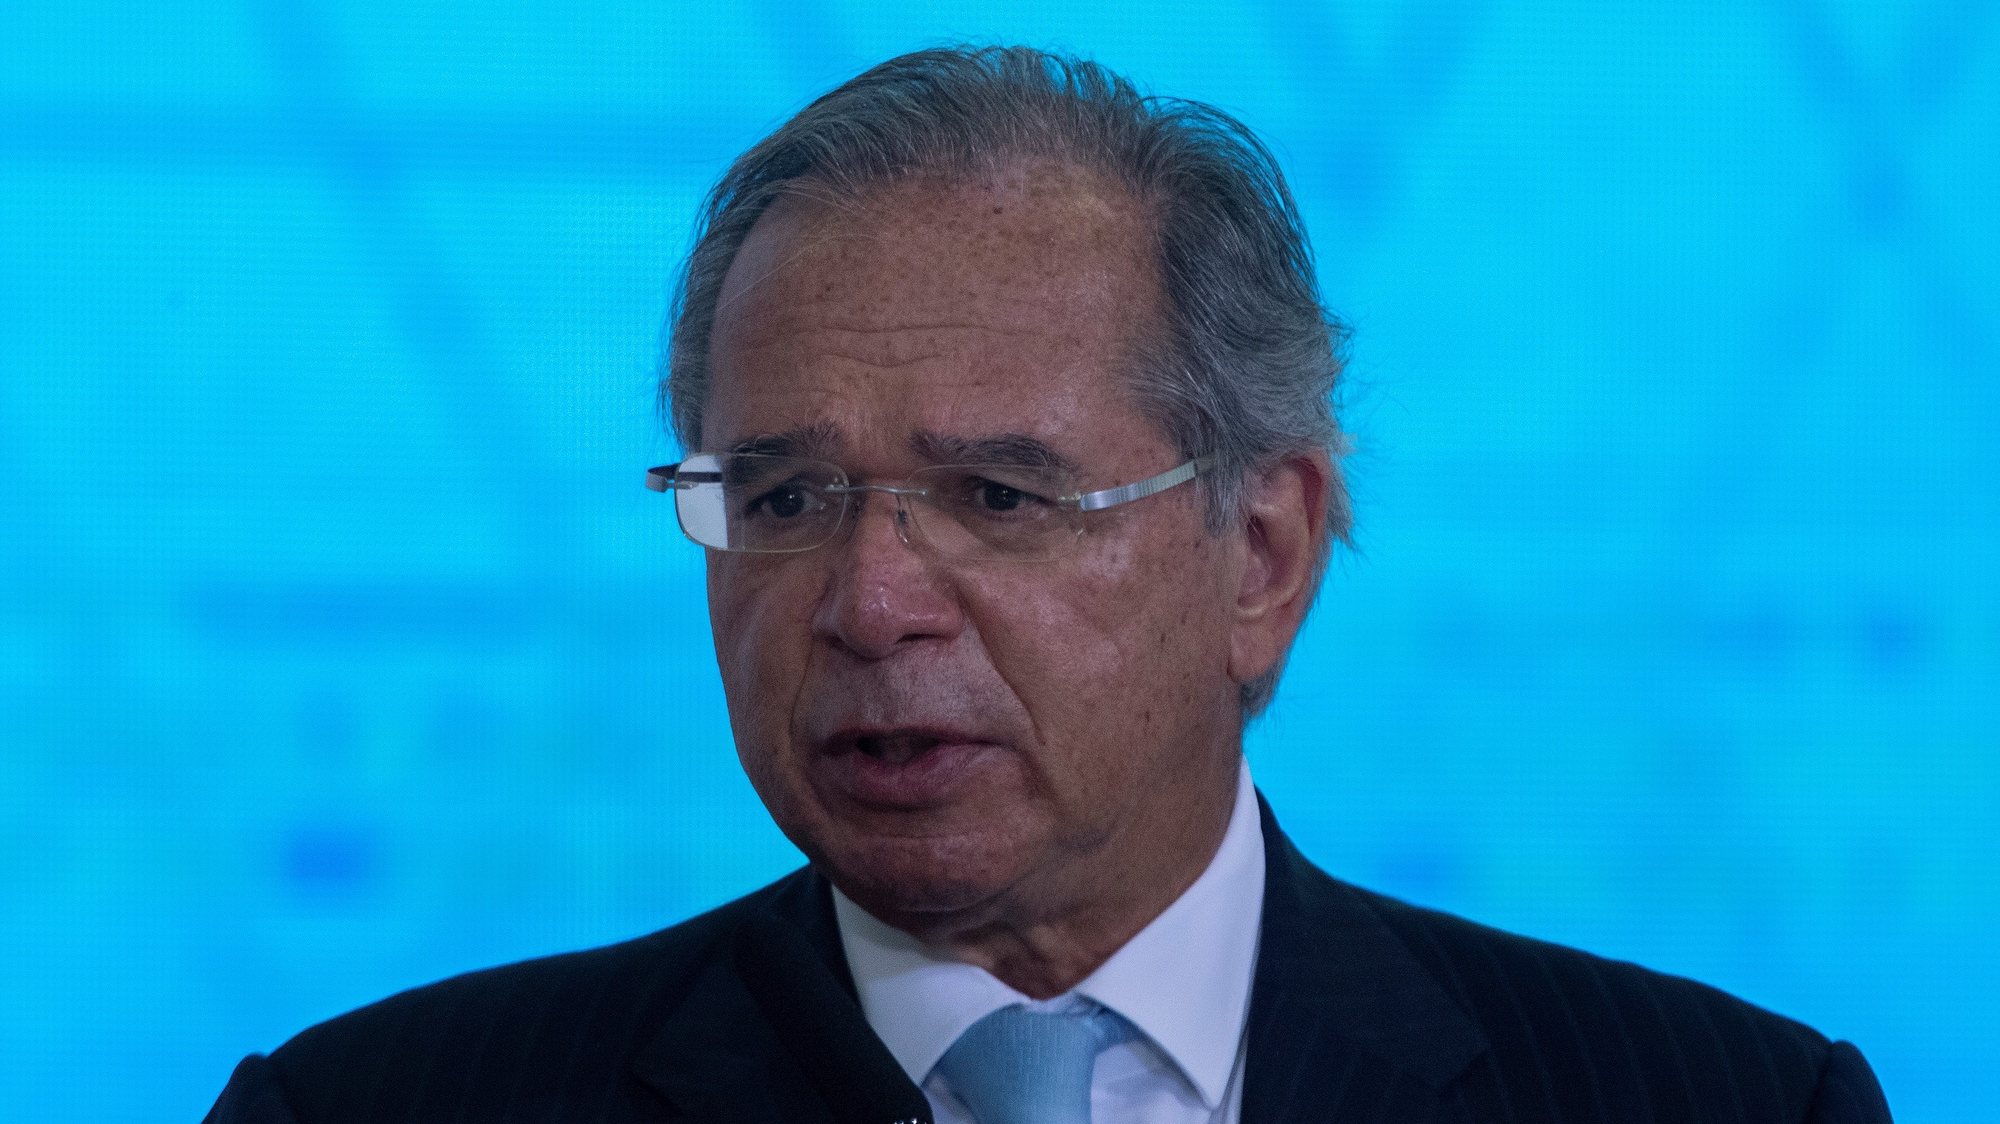 epa09343161 The Brazilian Minister of Economy, Paulo Guedes, speaks during the sanction ceremony of the Eletrobras Capitalization Law, at the Planalto Palace in Brasilia, Brazil, 13 July 2021. Bolsonaro sanctioned with some vetoes the Provisional Measure that regulates the privatization process of the state giant Eletrobras, the largest electricity company in Latin America, according to the Official Gazette of the Union published on 13 July.  EPA/Joedson Alves